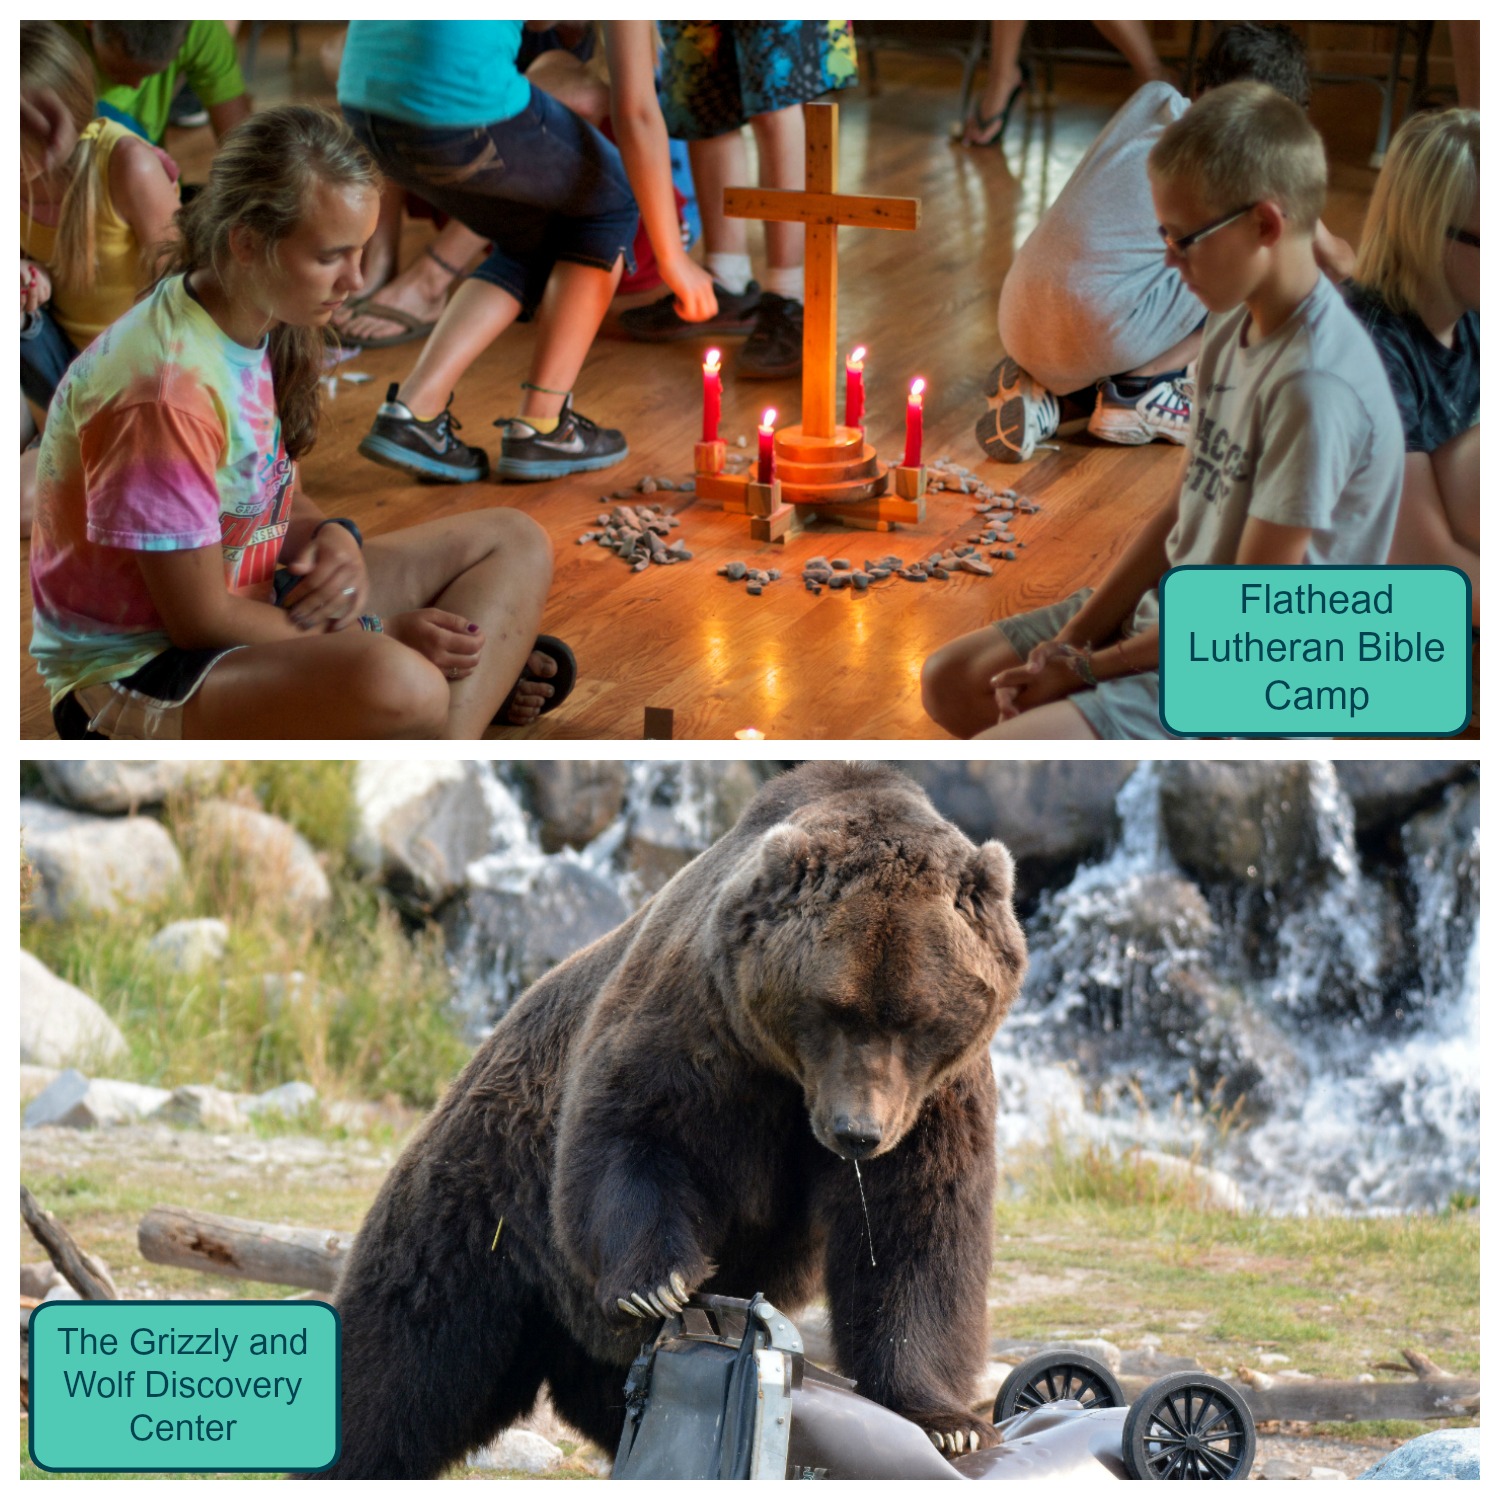 Image 1: a group of children sit on a wooden floor with a wooden cross, four candles, and a circle of rocks in the middle. Text overlay says "Flathead Lutheran Bible Camp." Image 2: A brown grizzly bear with a waterfall behind it. Text overlay says "The Grizzly and Wolf Discovery Center." 